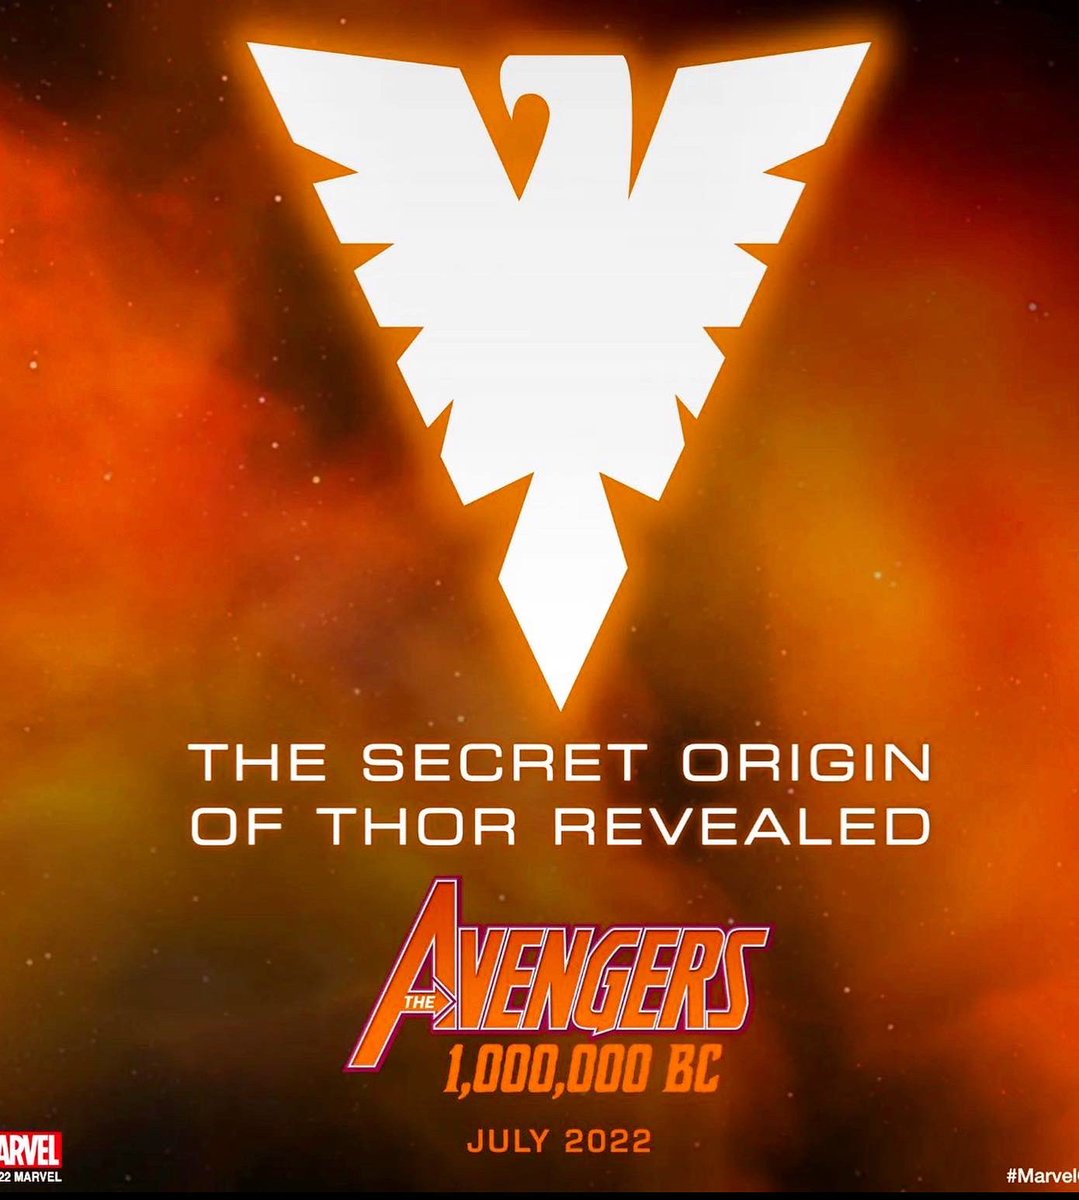 Listen…I want to be excited…but maybe this announcement means we’ll have a trailer for Thor Love and Thunder v soon? #XSpoilers #Xtwitter #xmen #avengers #thor https://t.co/6eAMH05YnP